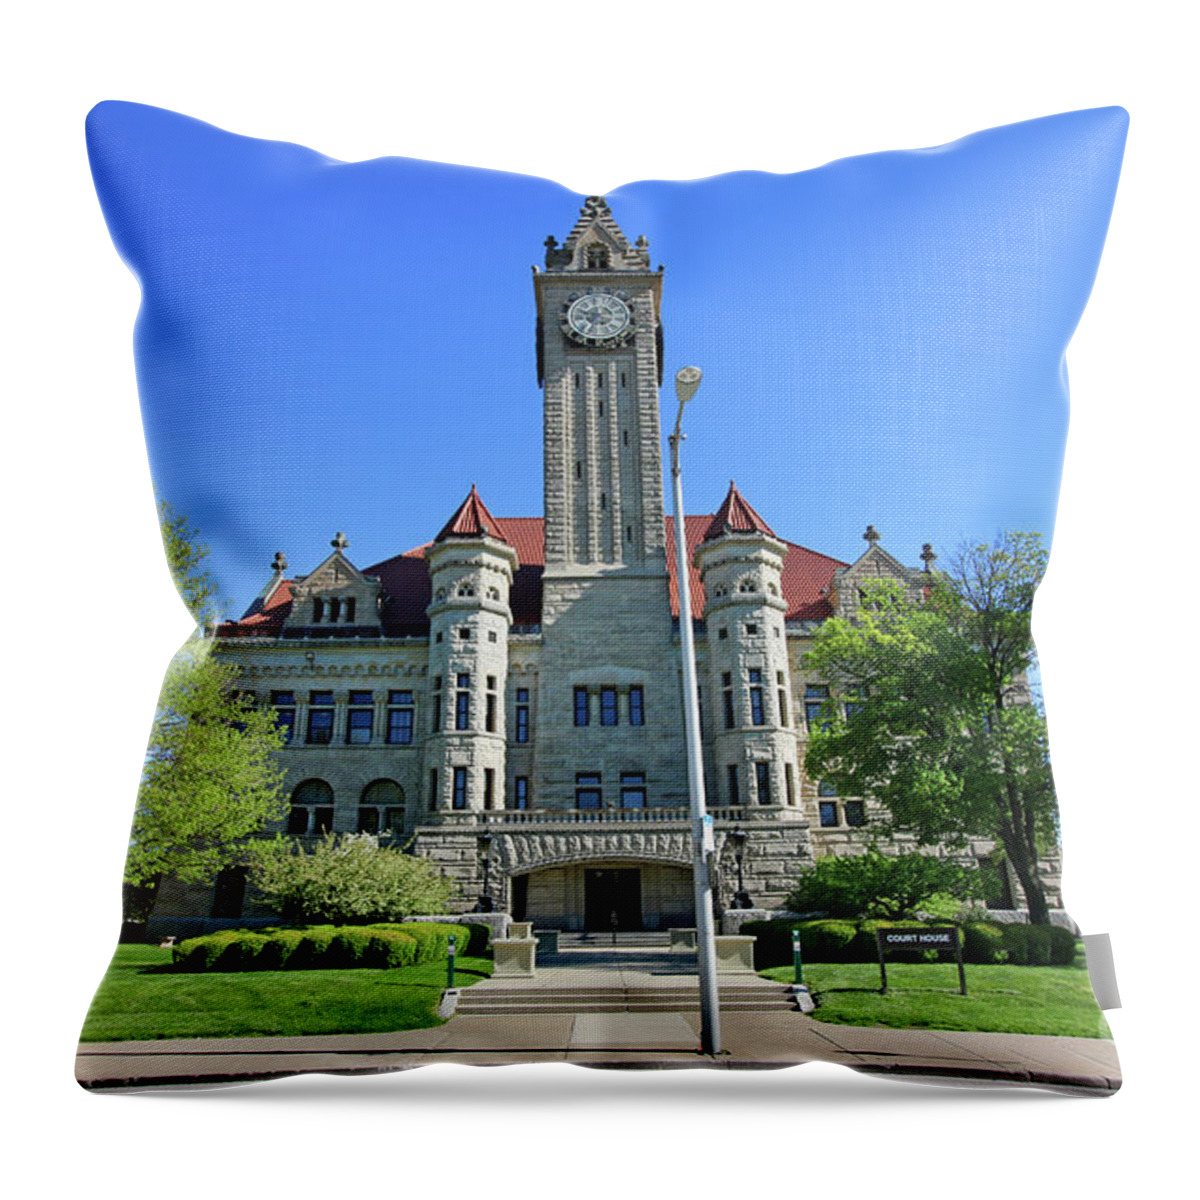 Wood County Courthouse Throw Pillow featuring the photograph Wood County Courthouse 5934 by Jack Schultz